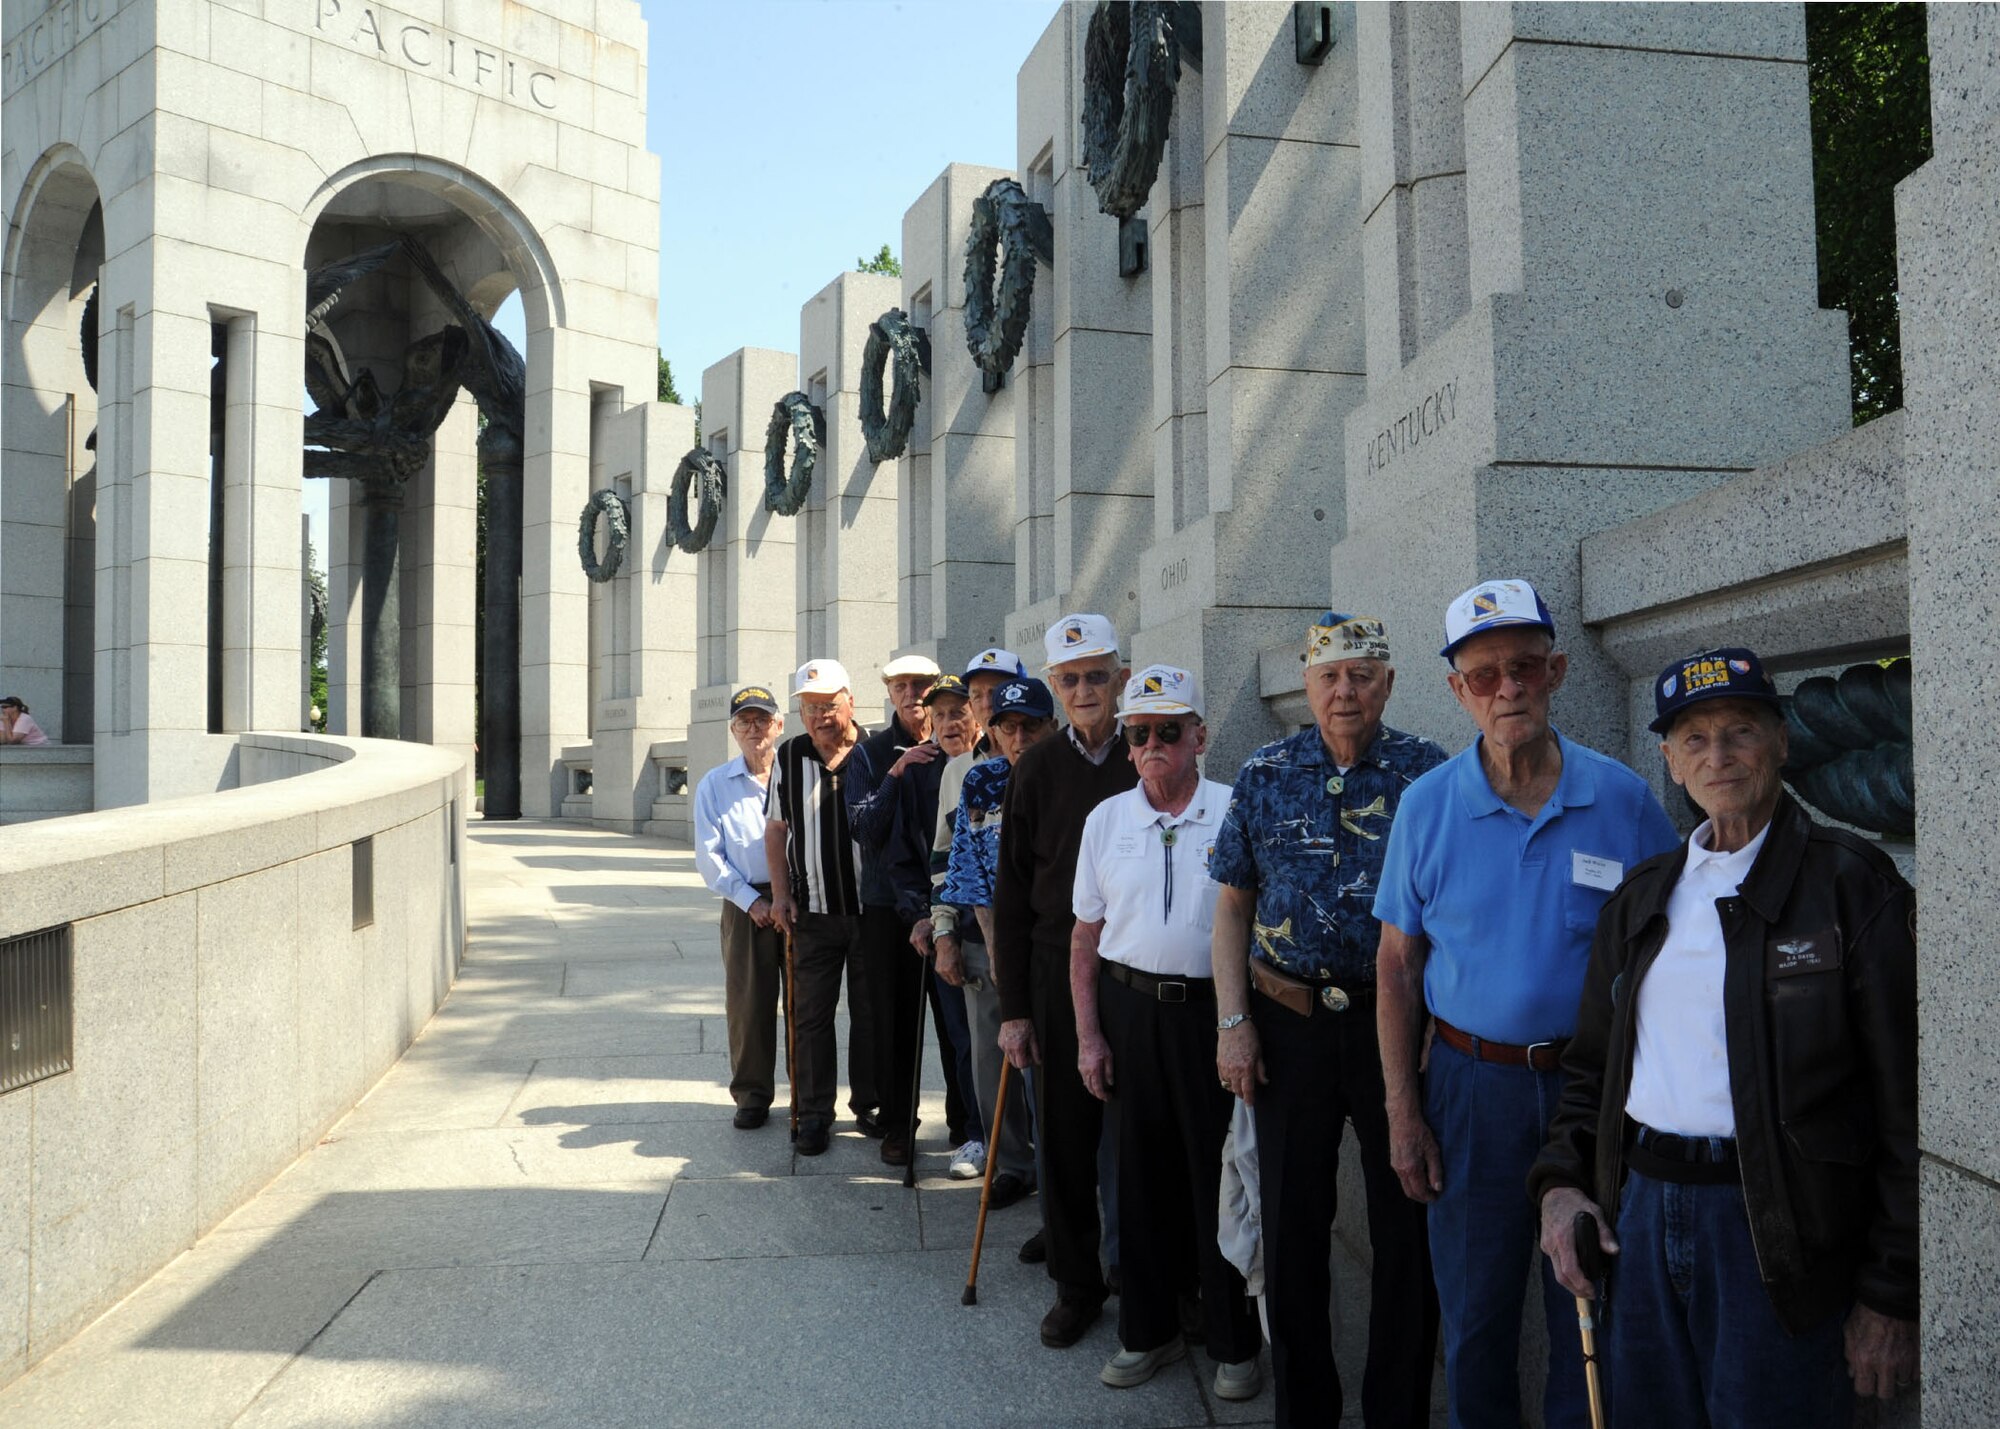 The 11th Bombardment group assembles for a group photo during a visit to the World War II Memorial in Washington, D.C., May 17. The memorial was built to pay tribute to those who served in WWII. (U.S. Air Force photo/Airman 1st Class Aaron Stout)